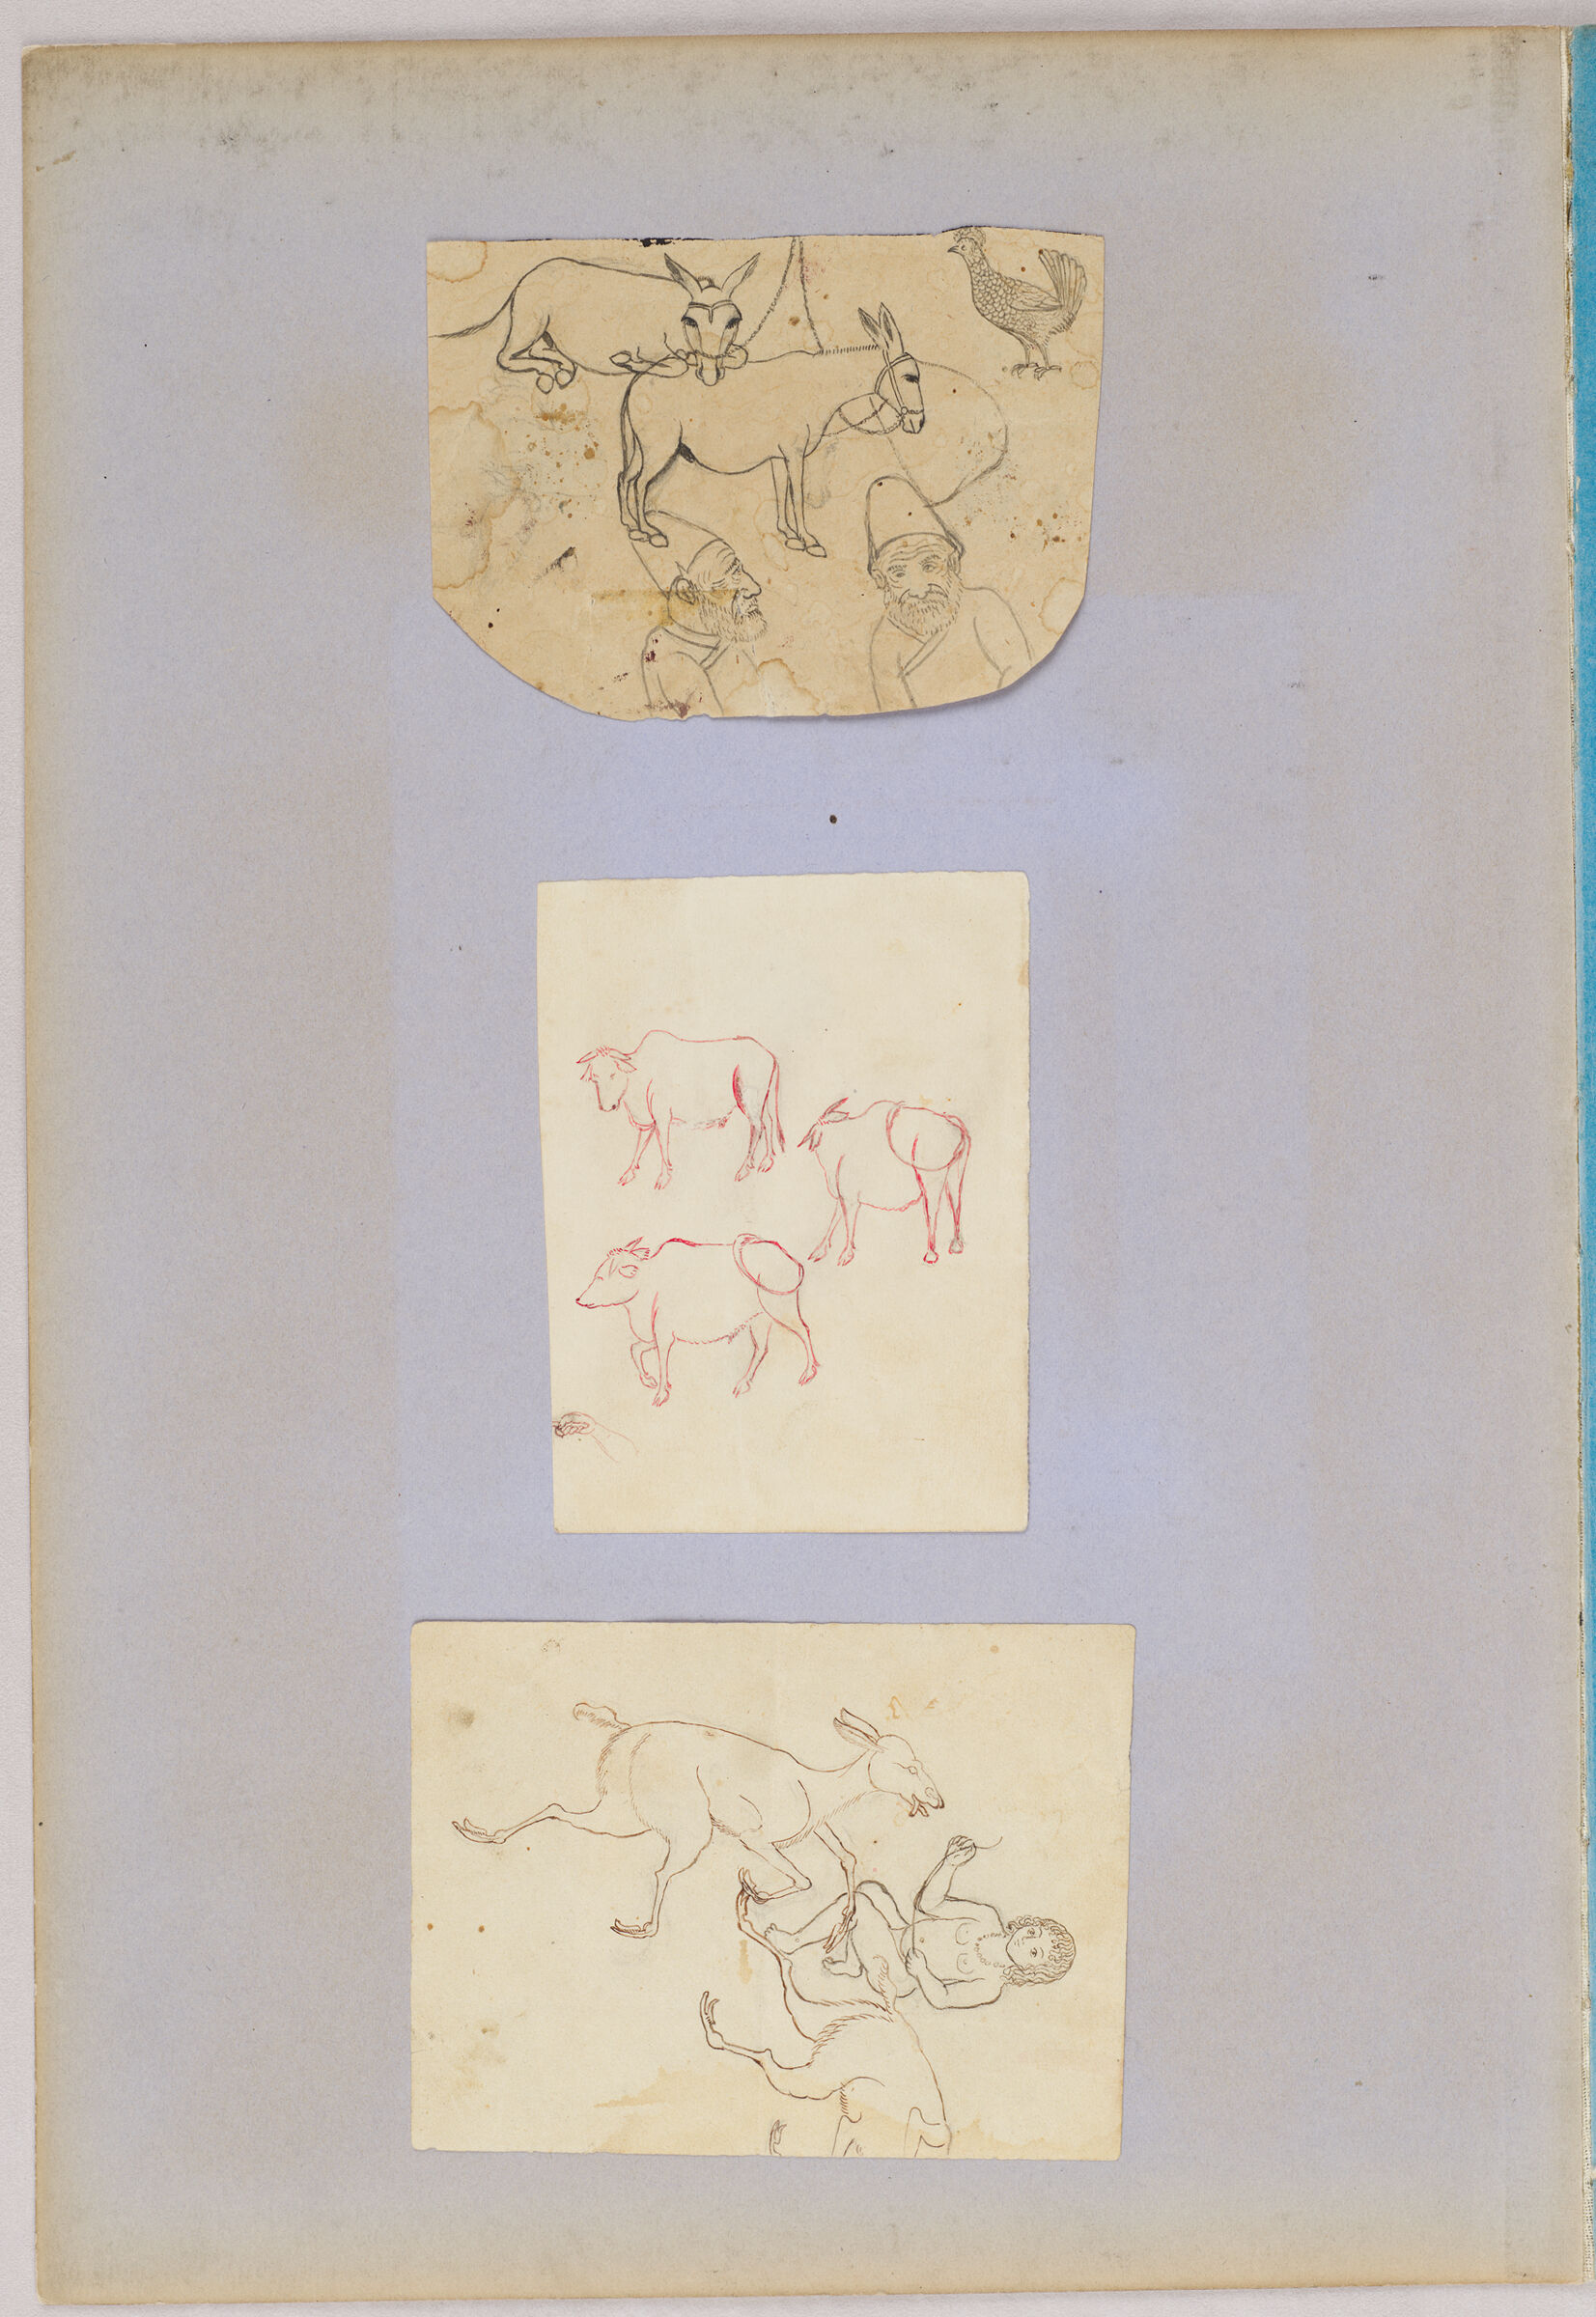 Folio 34 From An Album Of Drawings And Paintings: Three Sheets With Sketches Of People And Animals (Recto); Lion Attacking A Cow, Framed By Colored Paper Borders (Verso)